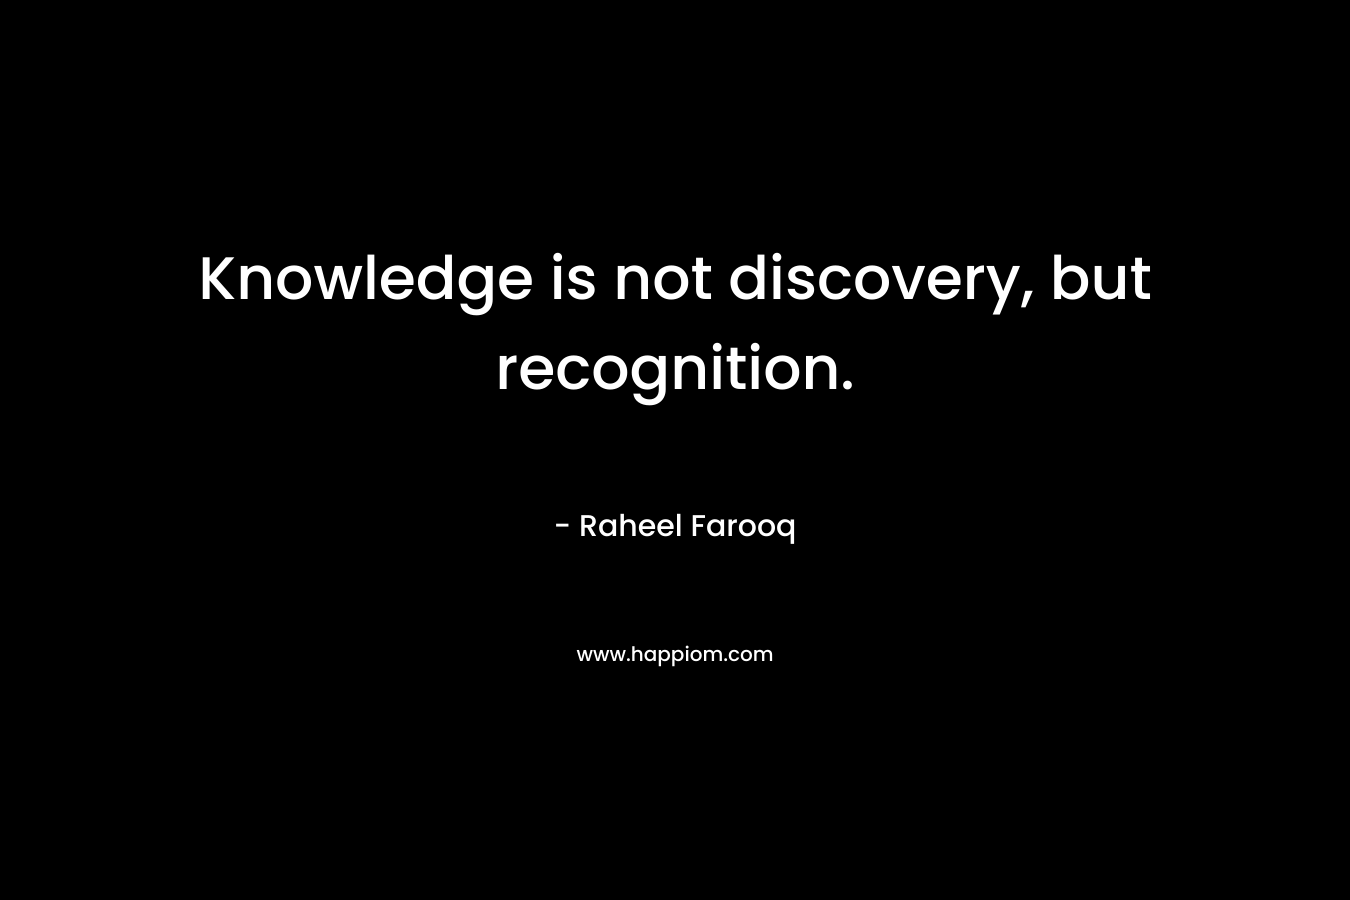 Knowledge is not discovery, but recognition. – Raheel Farooq